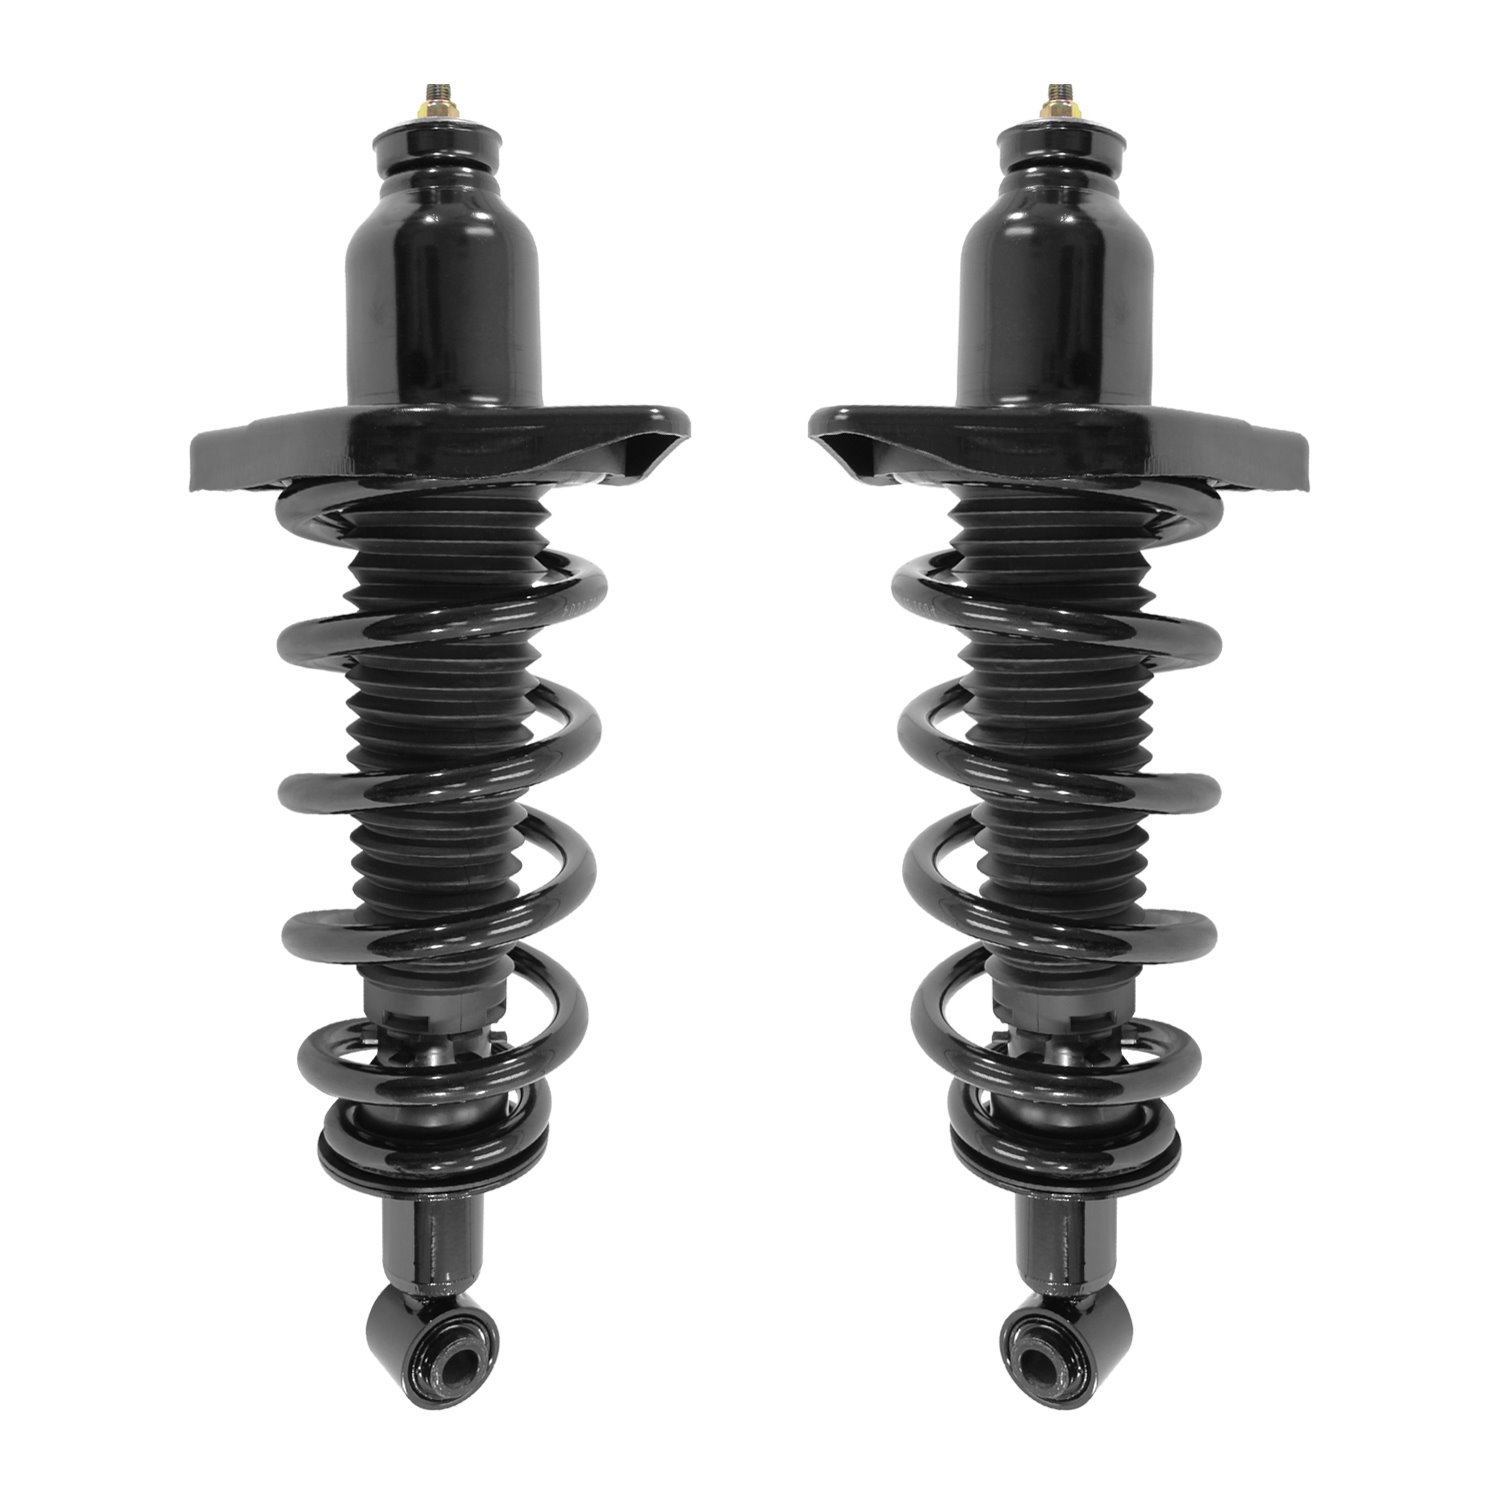 2-16073-16074-001 Rear Suspension Strut & Coil Spring Assemby Set Fits Select Acura MDX